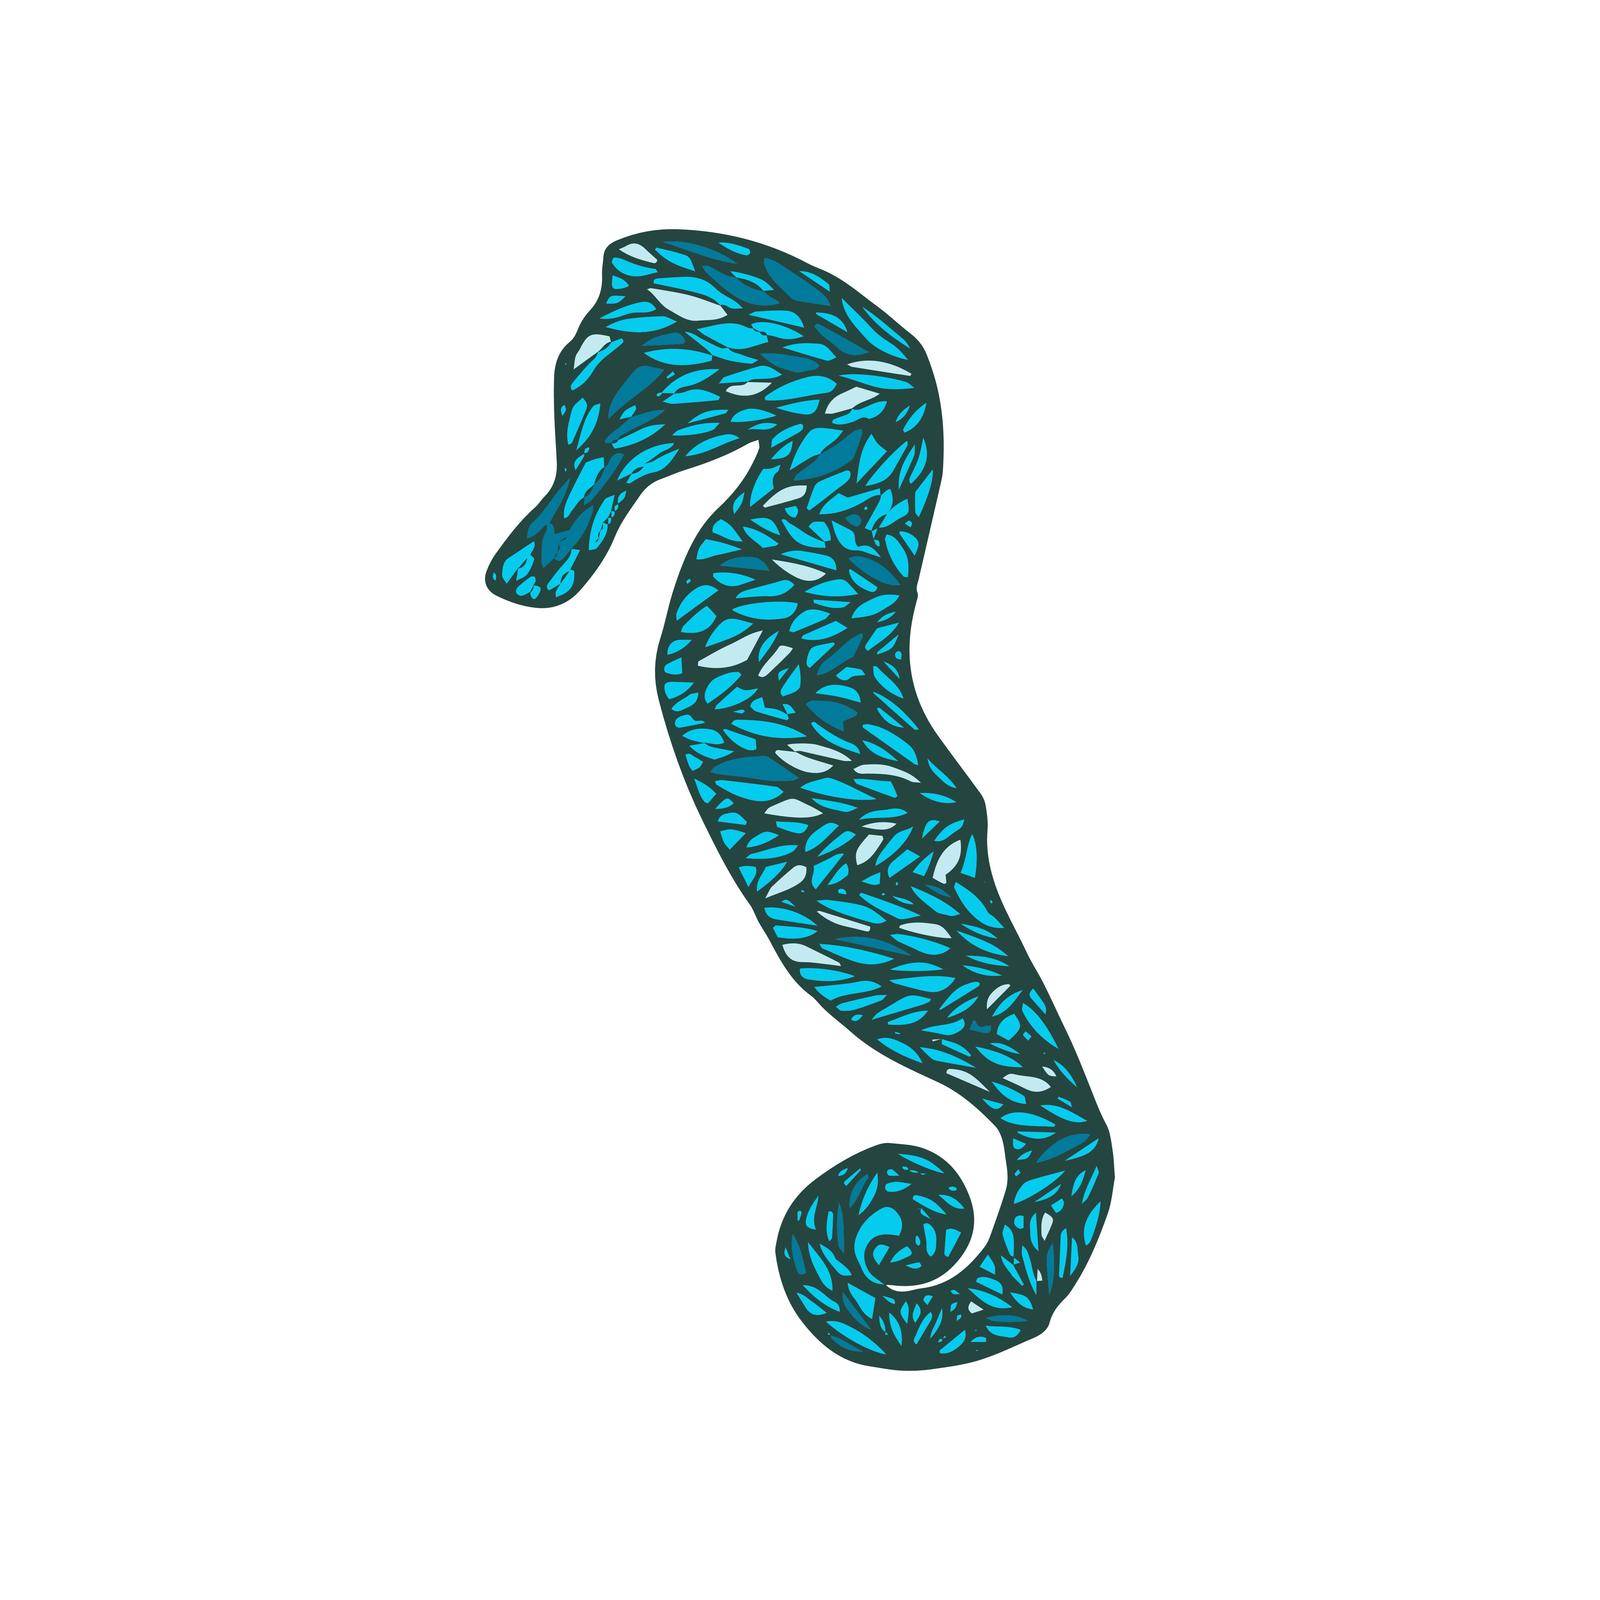 Doodle sea horse in vector. Hand drawn